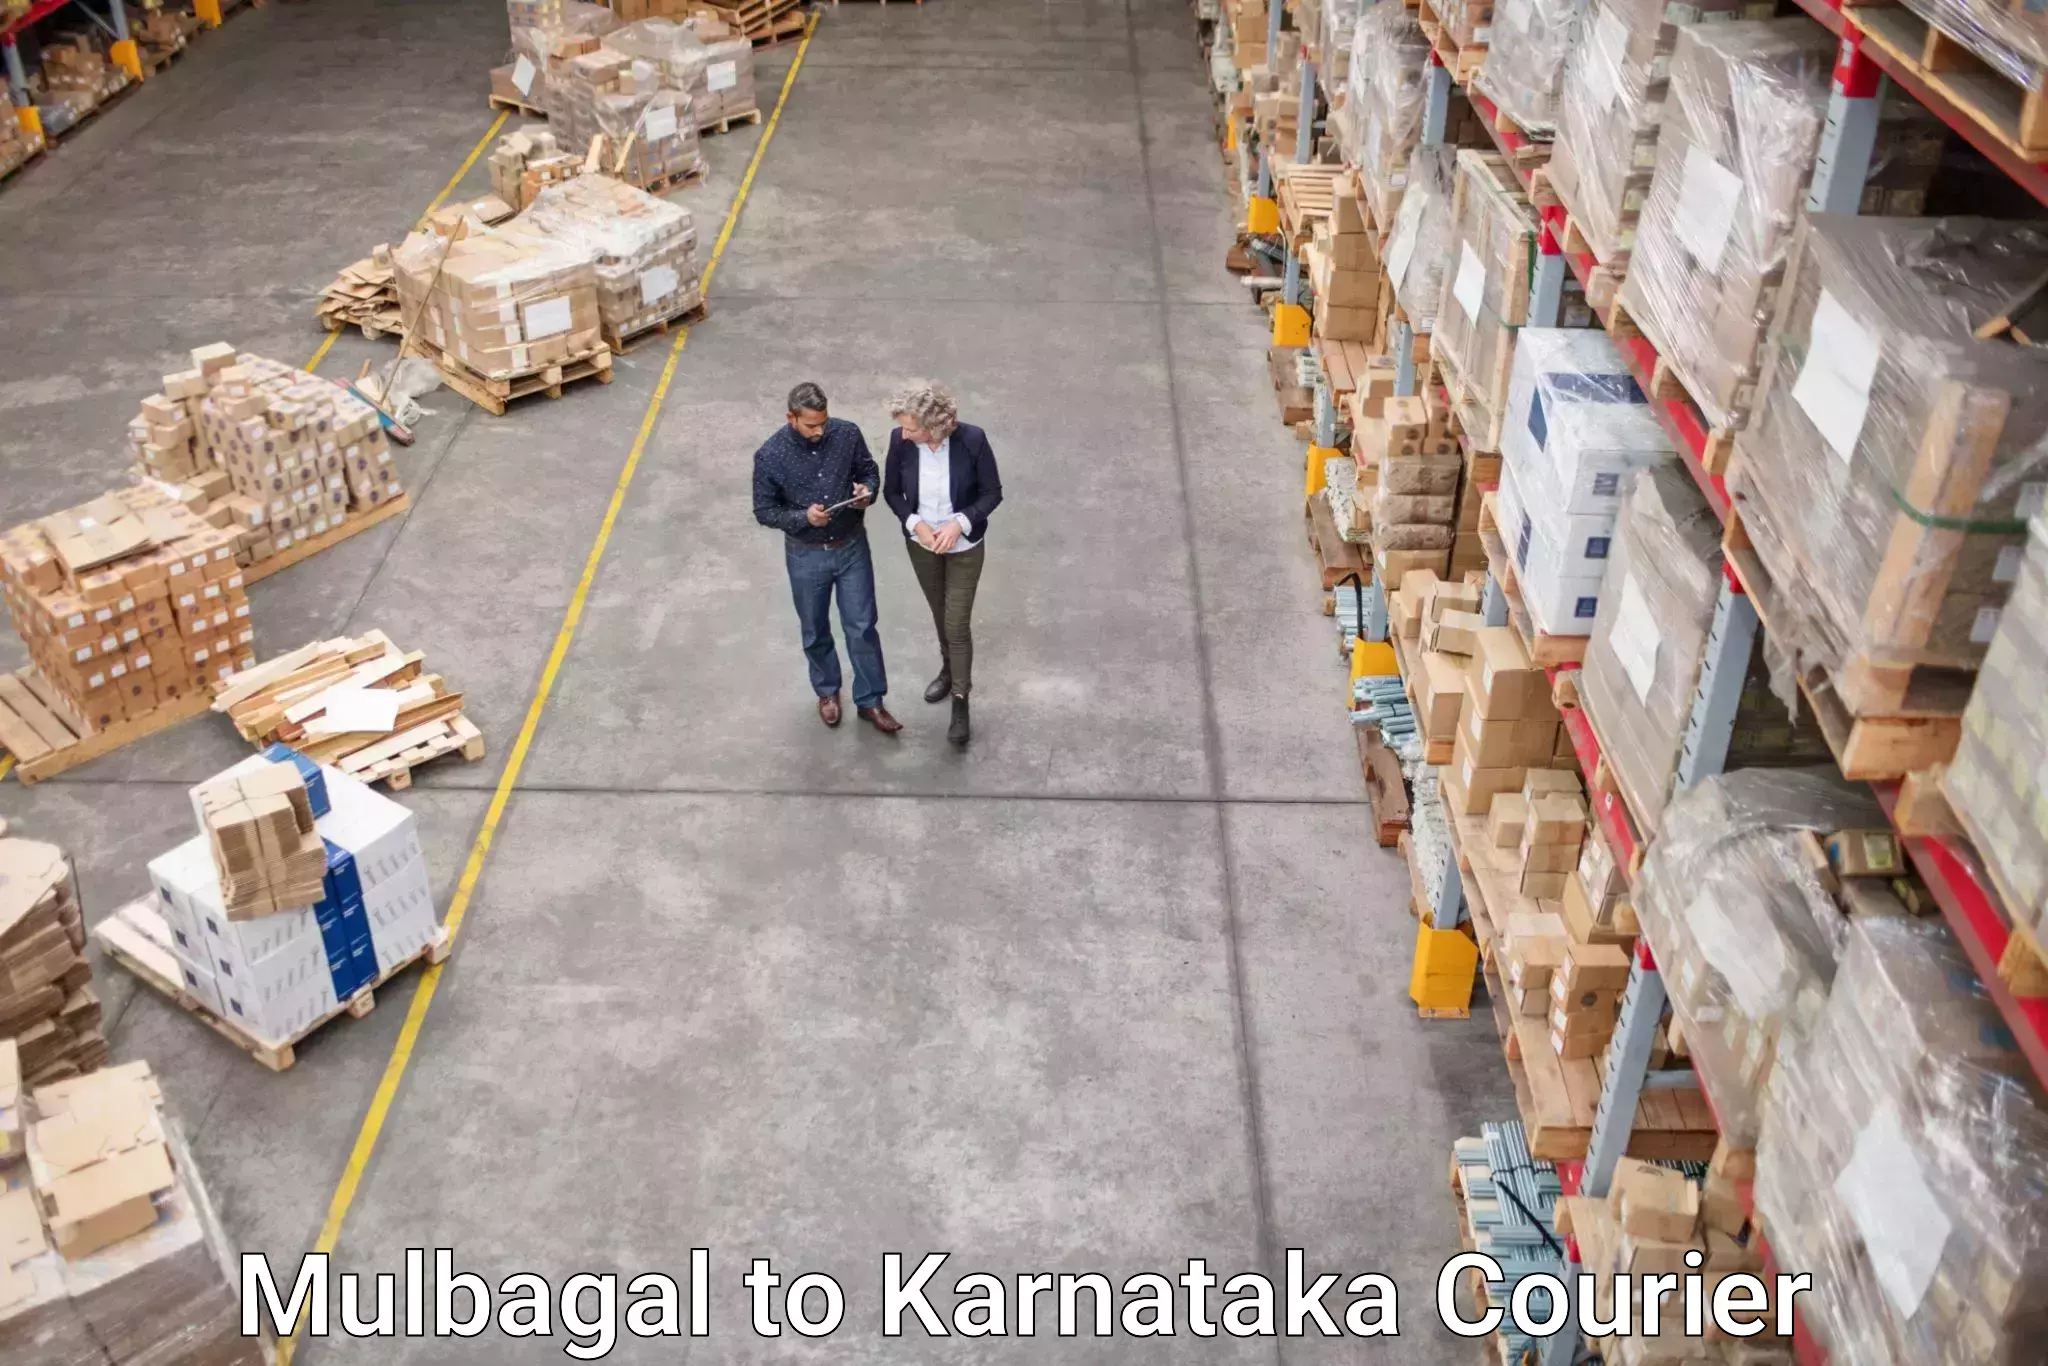 Package delivery network Mulbagal to Karnataka